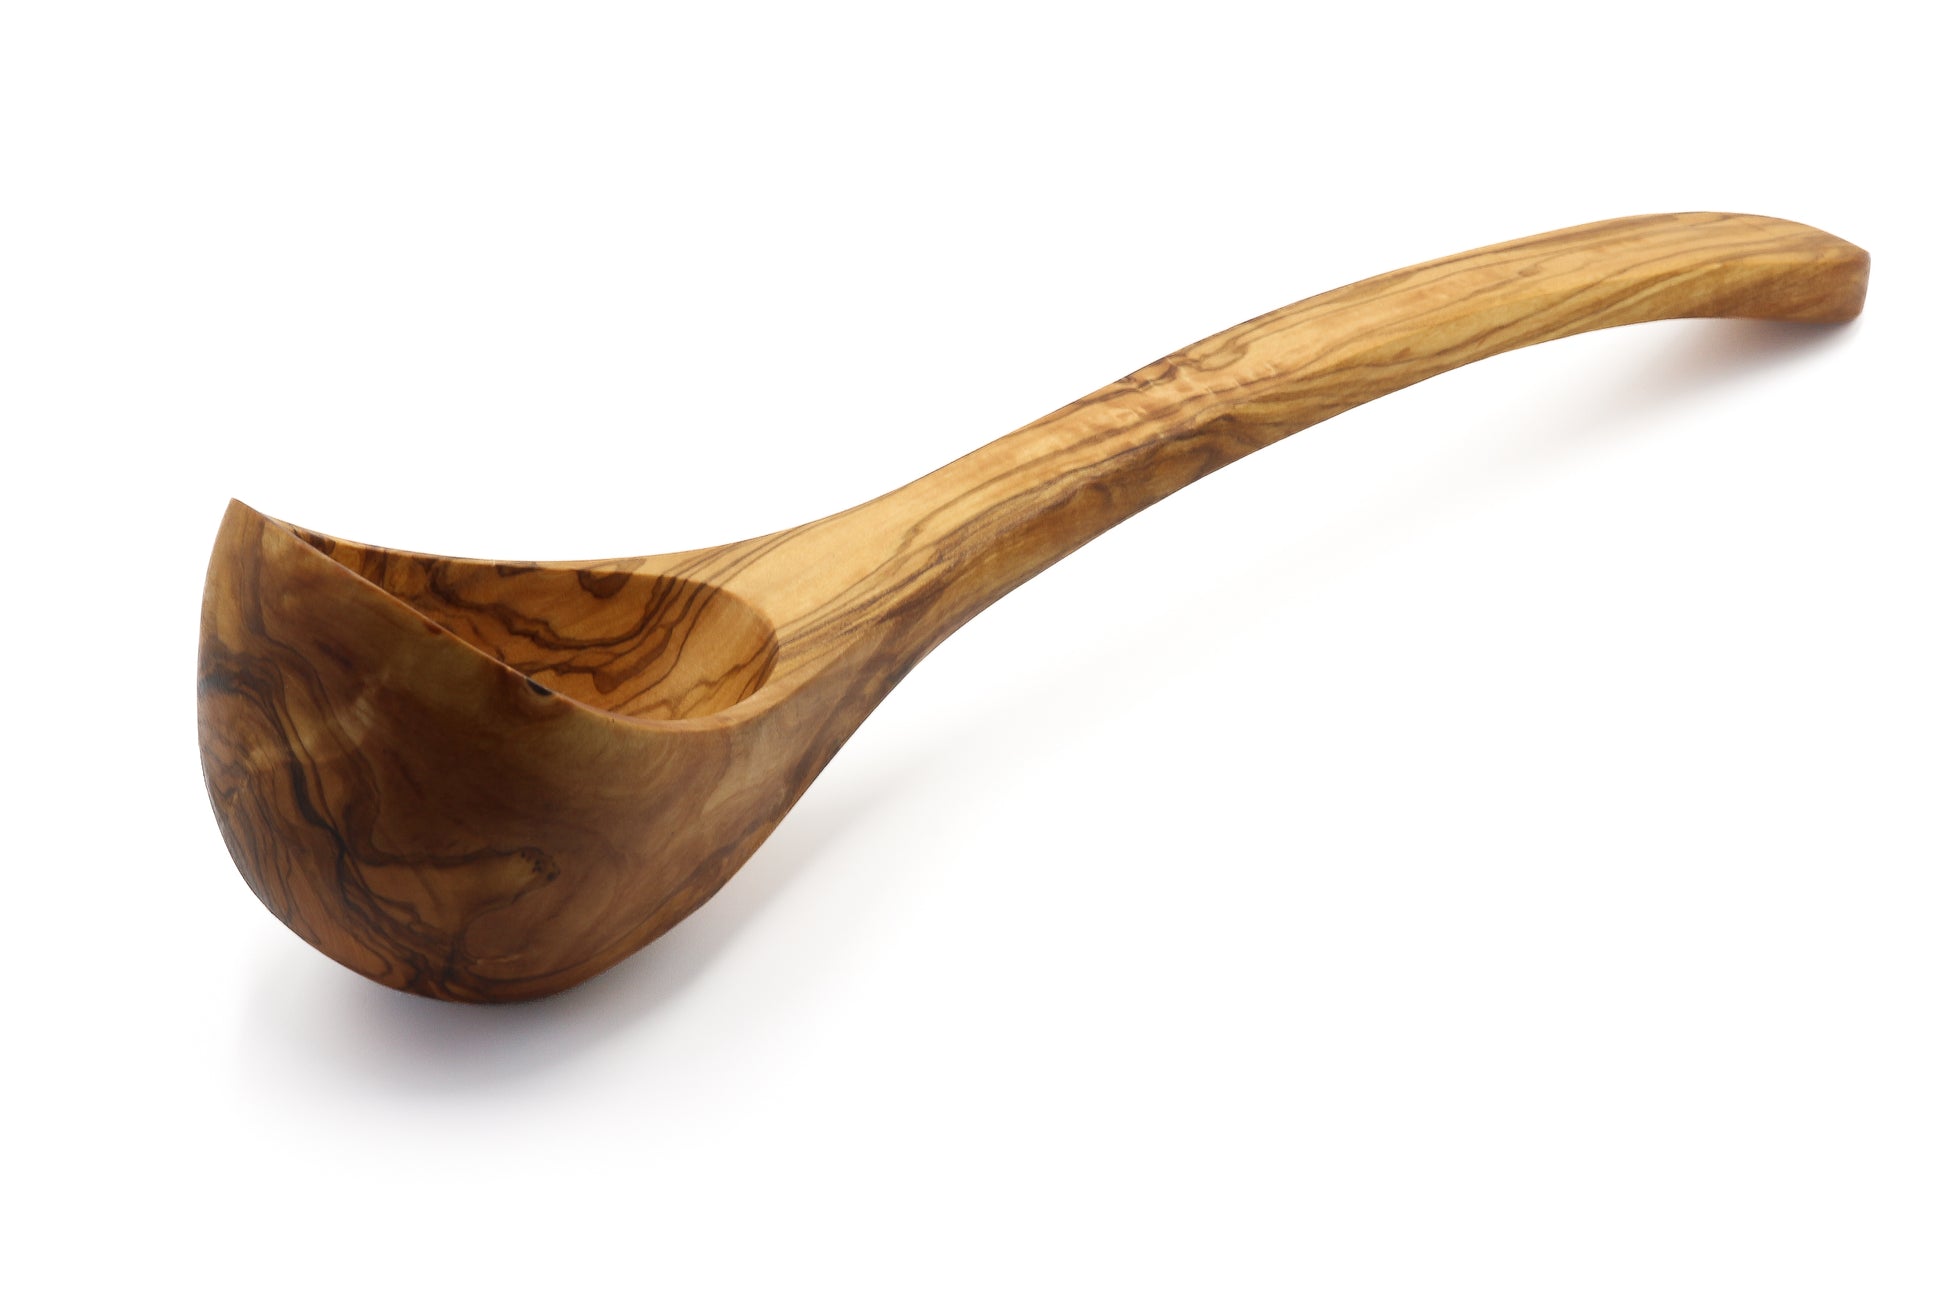 Artisan-made ladle in beautiful olive wood